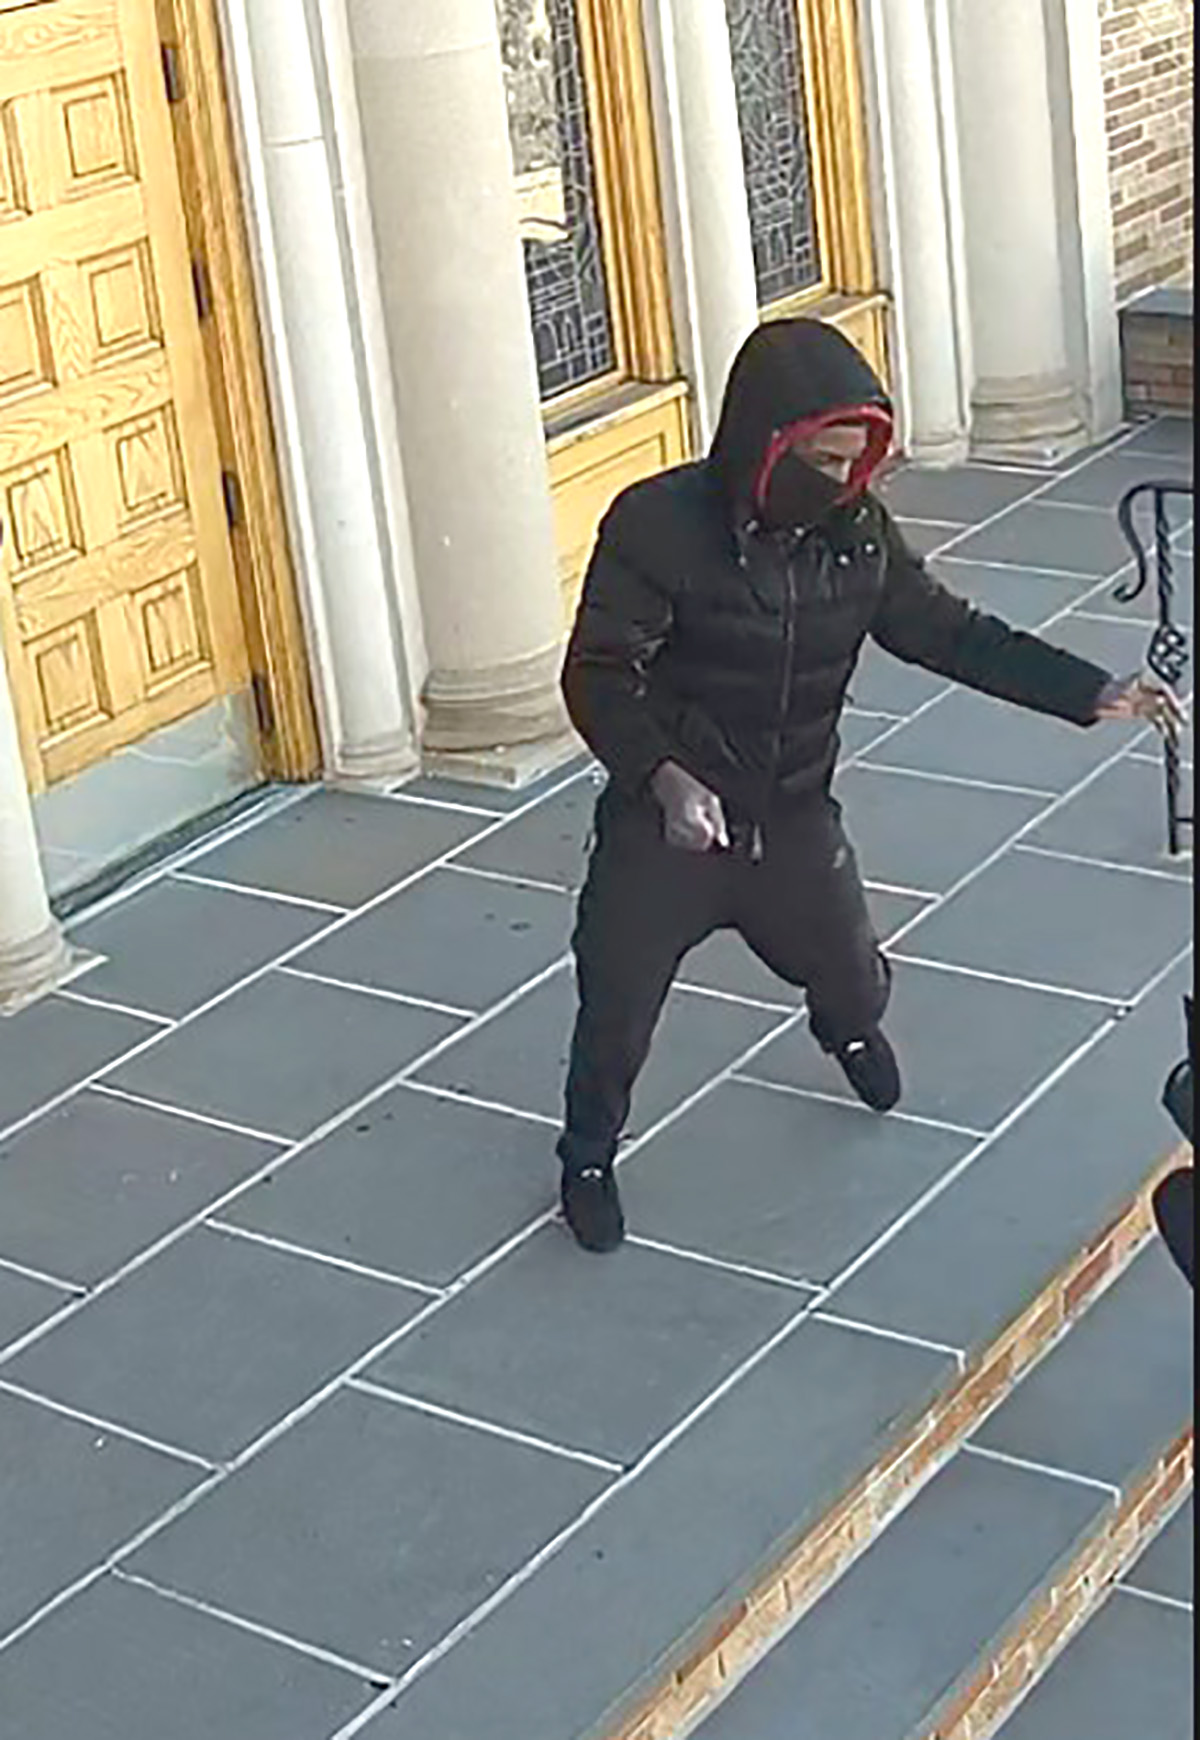 The NYPD is searching for this man in connection with an attack on an elderly woman outside a Queens church. The woman is in critical condition. -Photo by NYPD